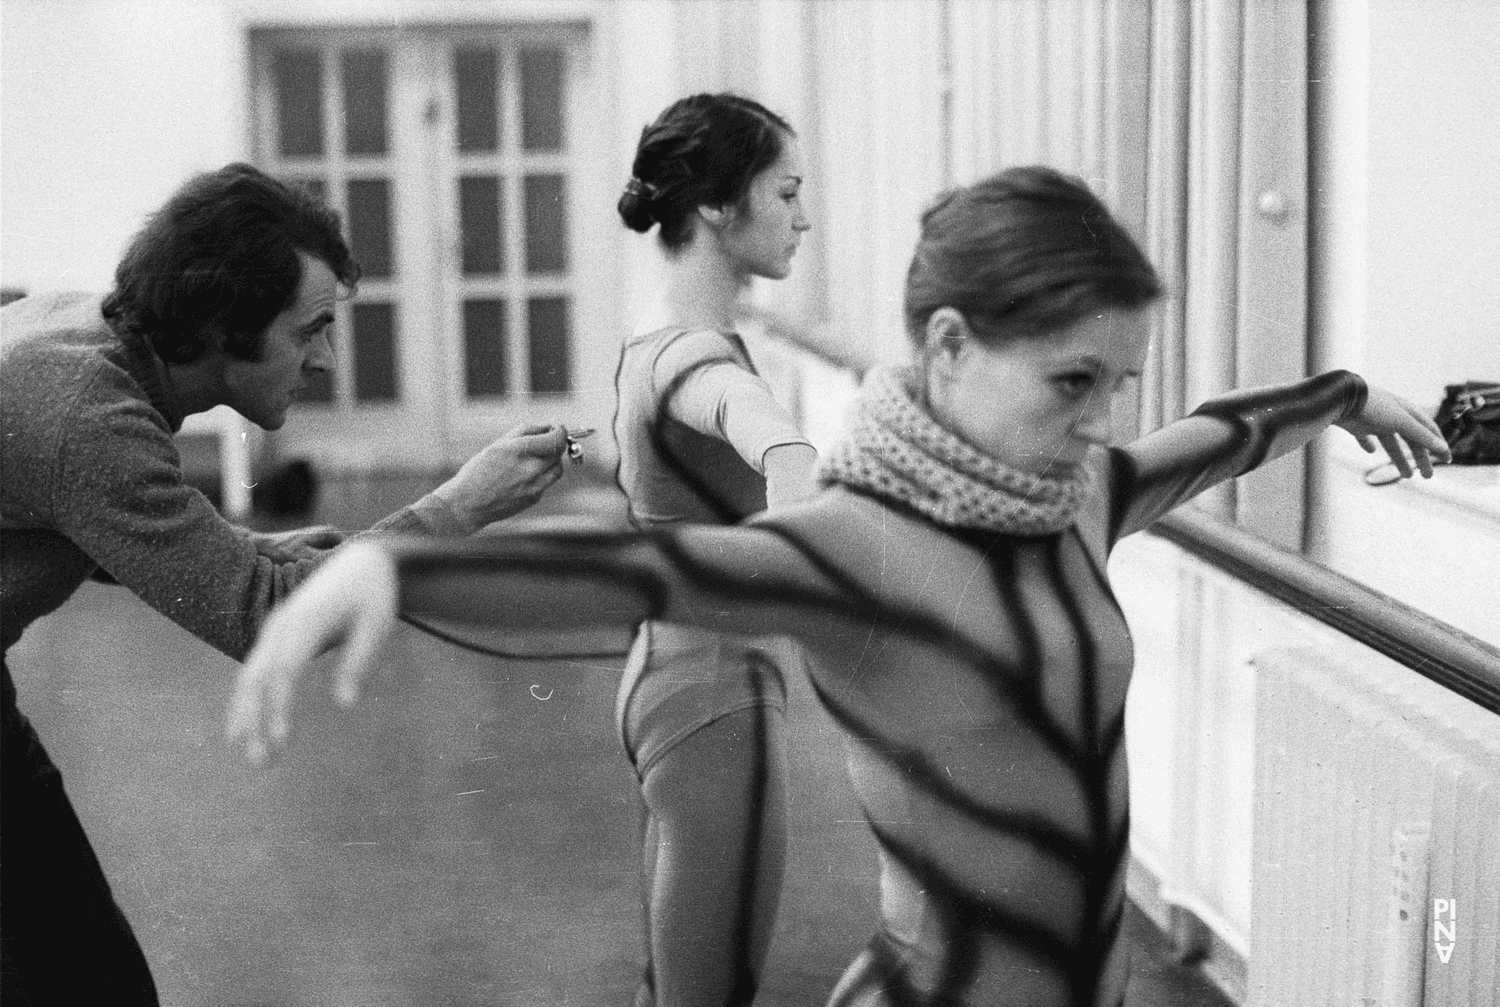 Erika Fabry, Christian Piper and Fridel Deharde in “Nachnull (After Zero)” by Pina Bausch